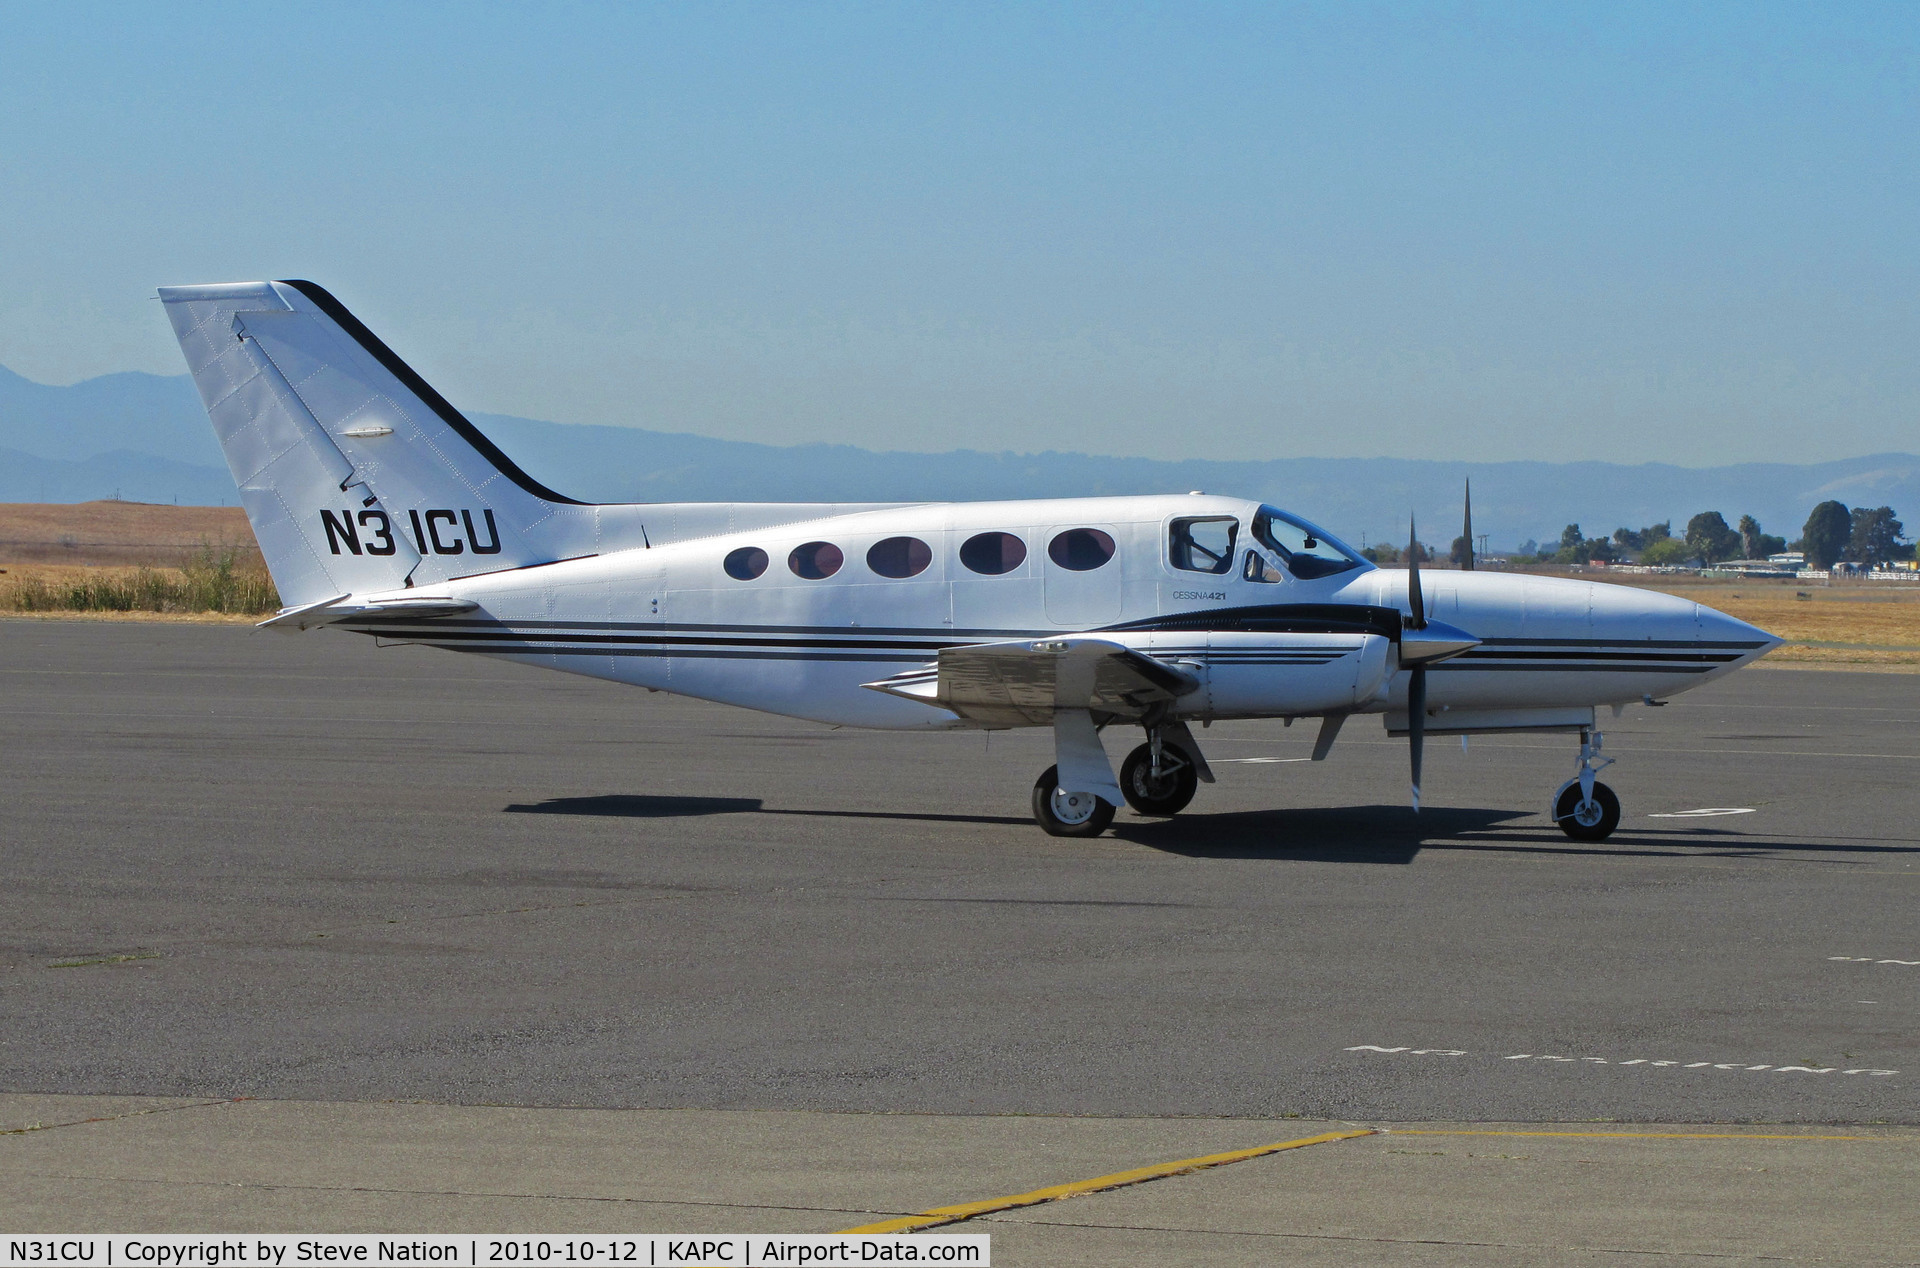 N31CU, 1977 Cessna 421C Golden Eagle C/N 421C0341, Westlog Inc. (Brookings, OR) 1977 Cessna 421C heads out for take-off from Napa County Airport, CA